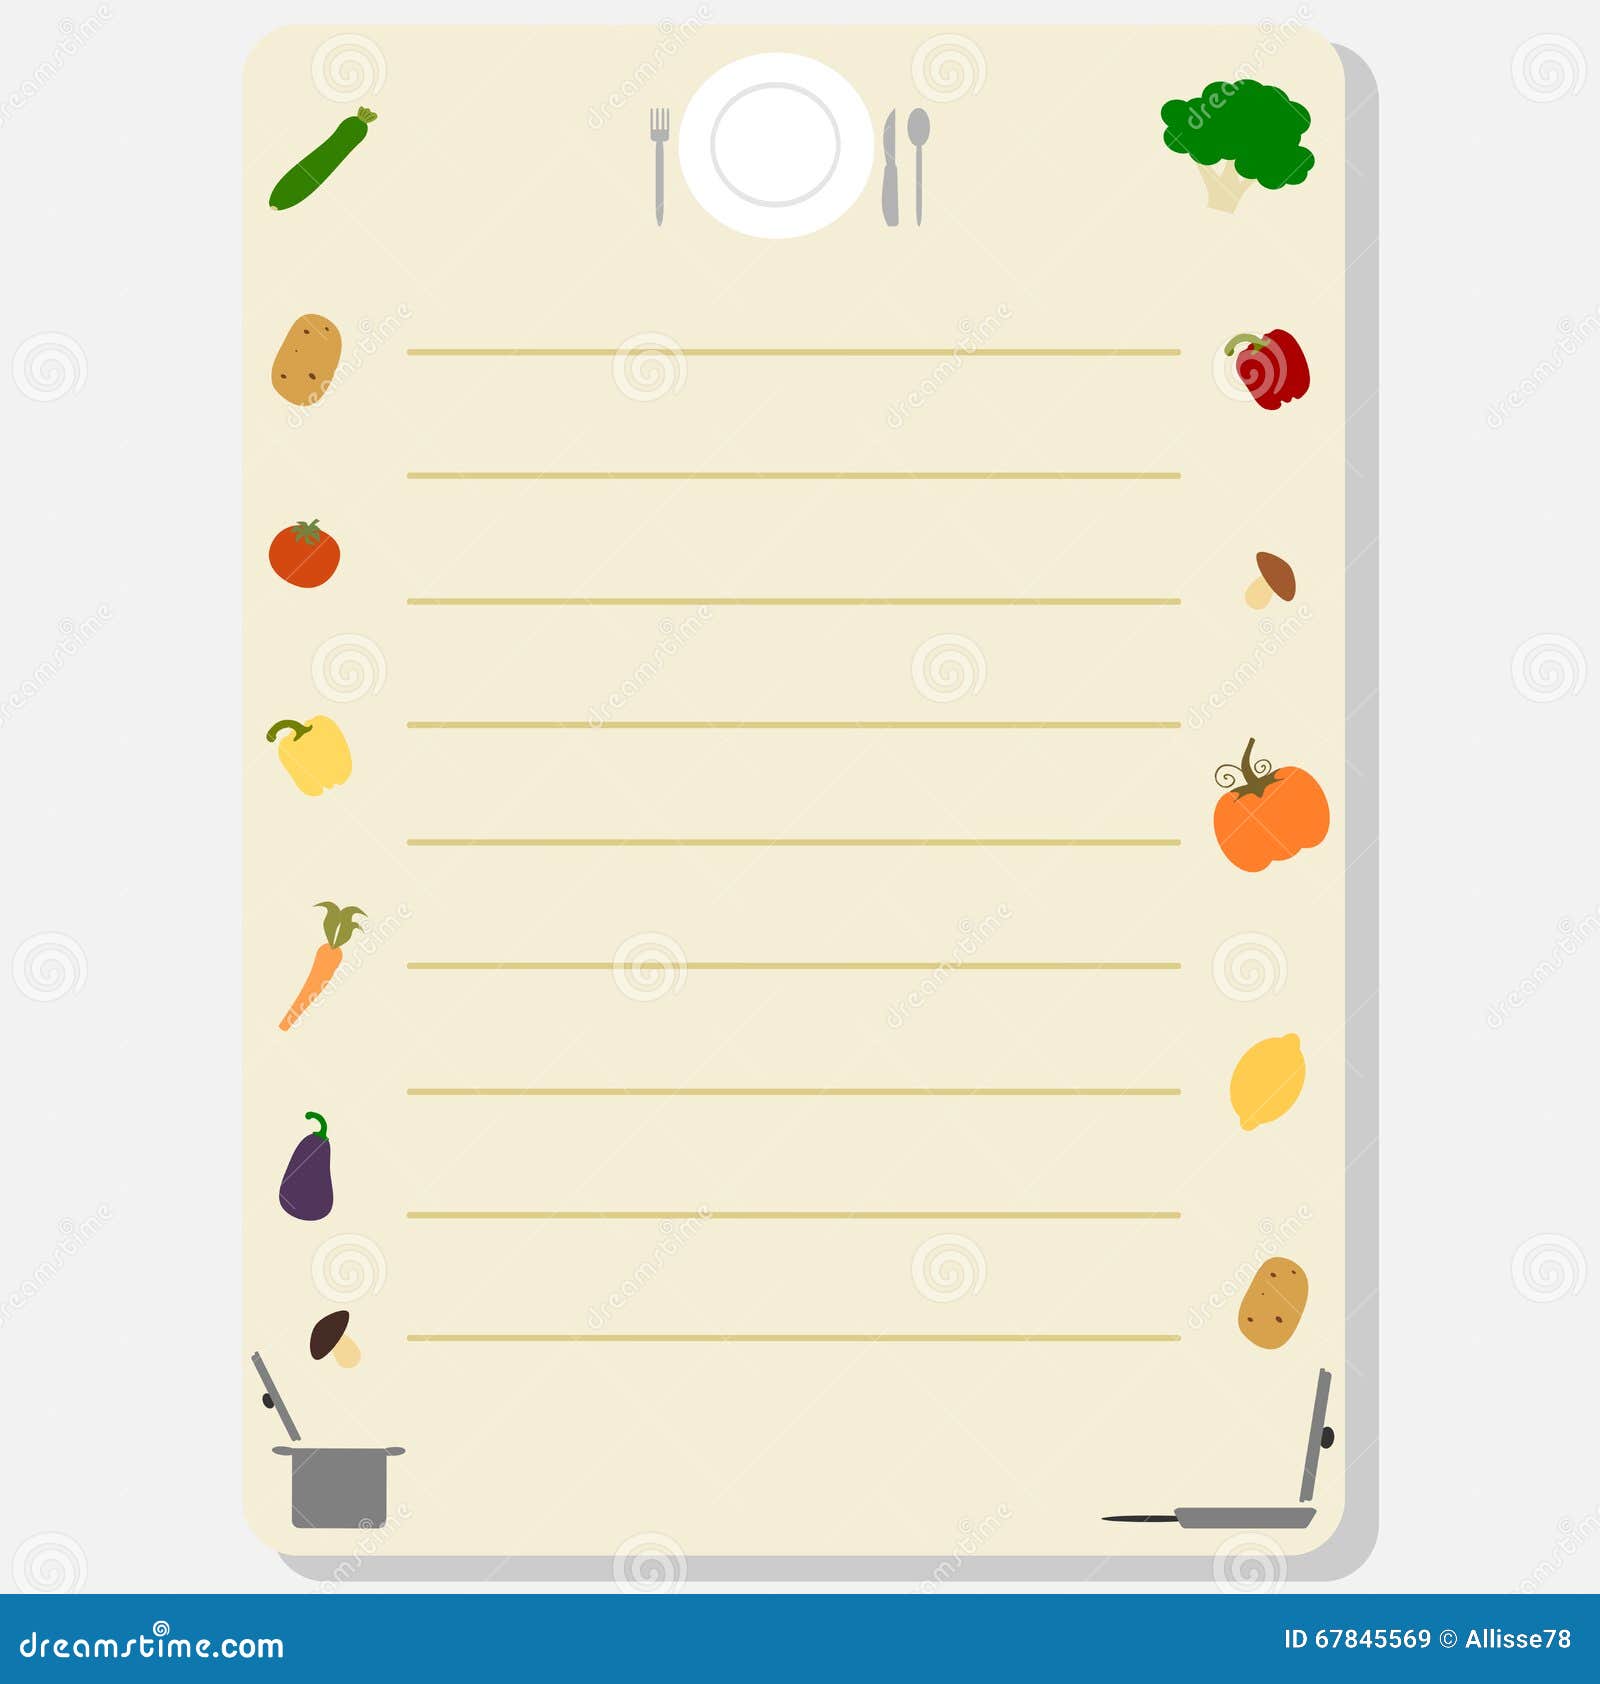 Cute Colorful Template Frame for a Recipe Book or Card Illustration with  Vegetables Stock Vector - Illustration of food, paper: 67845569